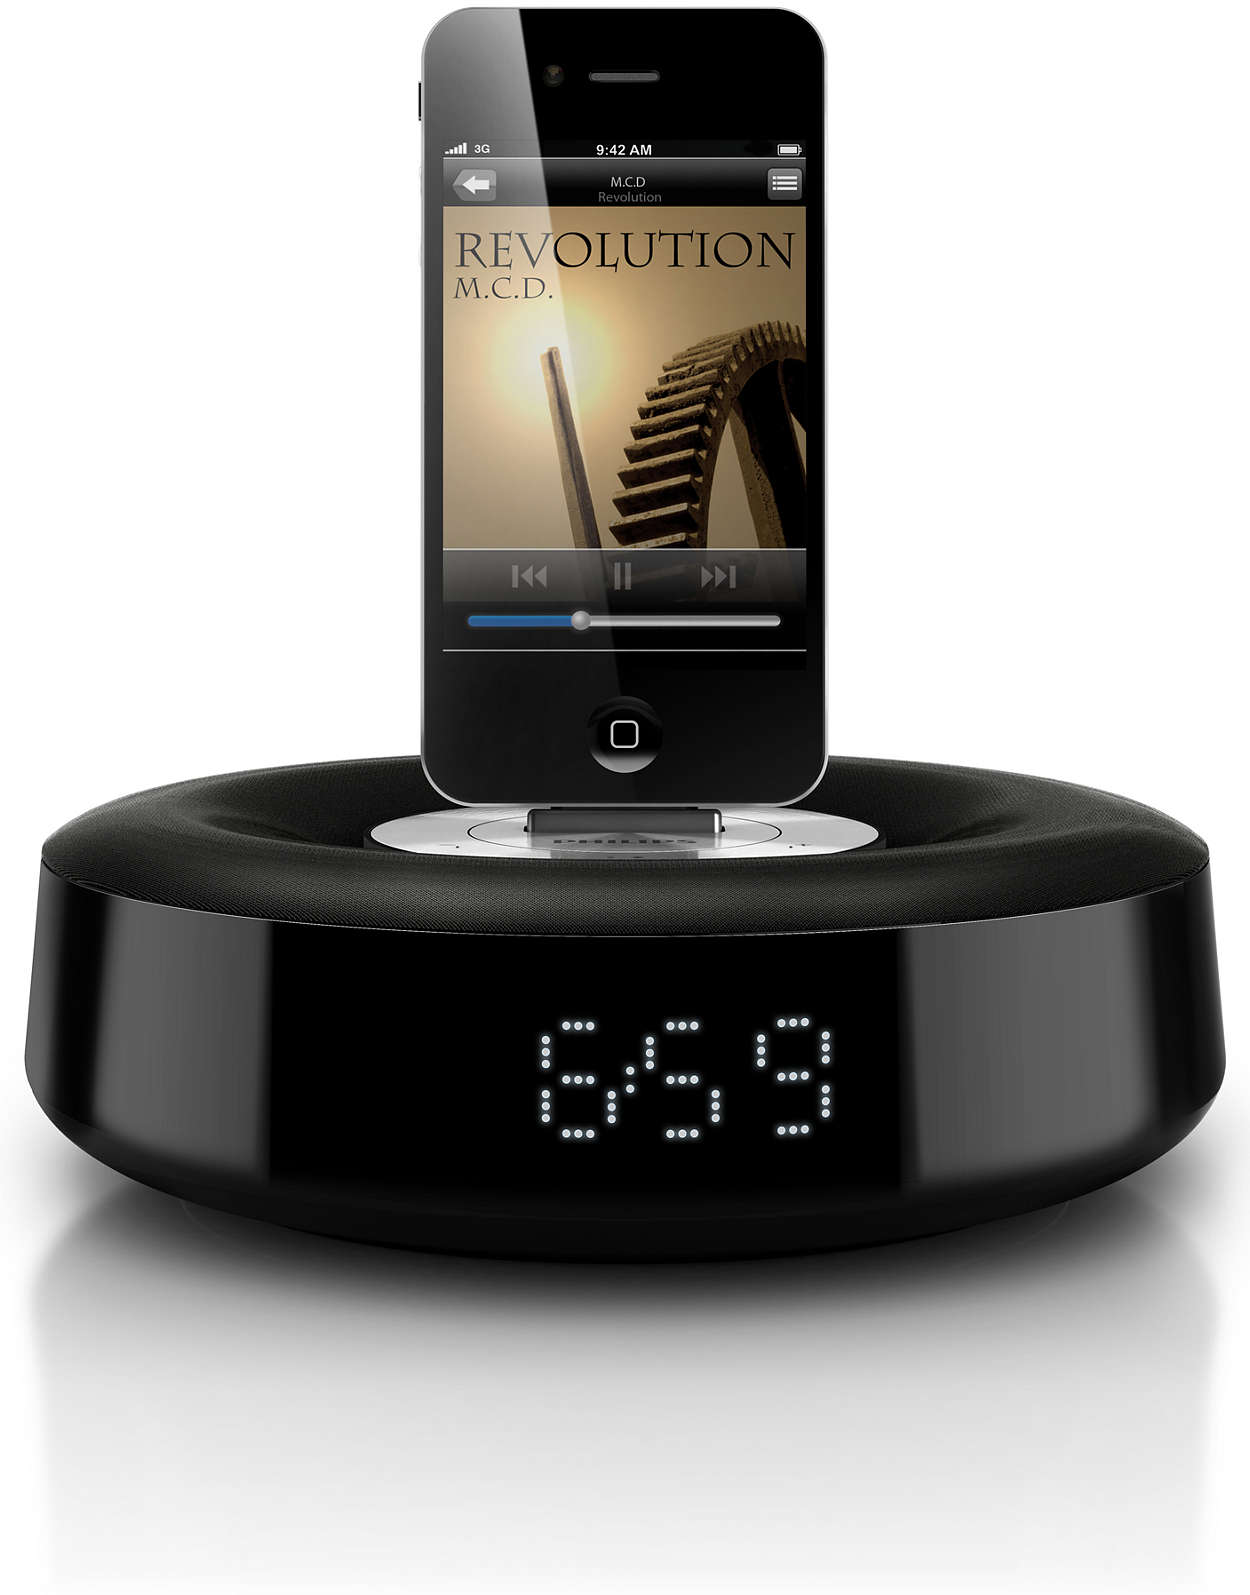 Fill your bedroom with music and style